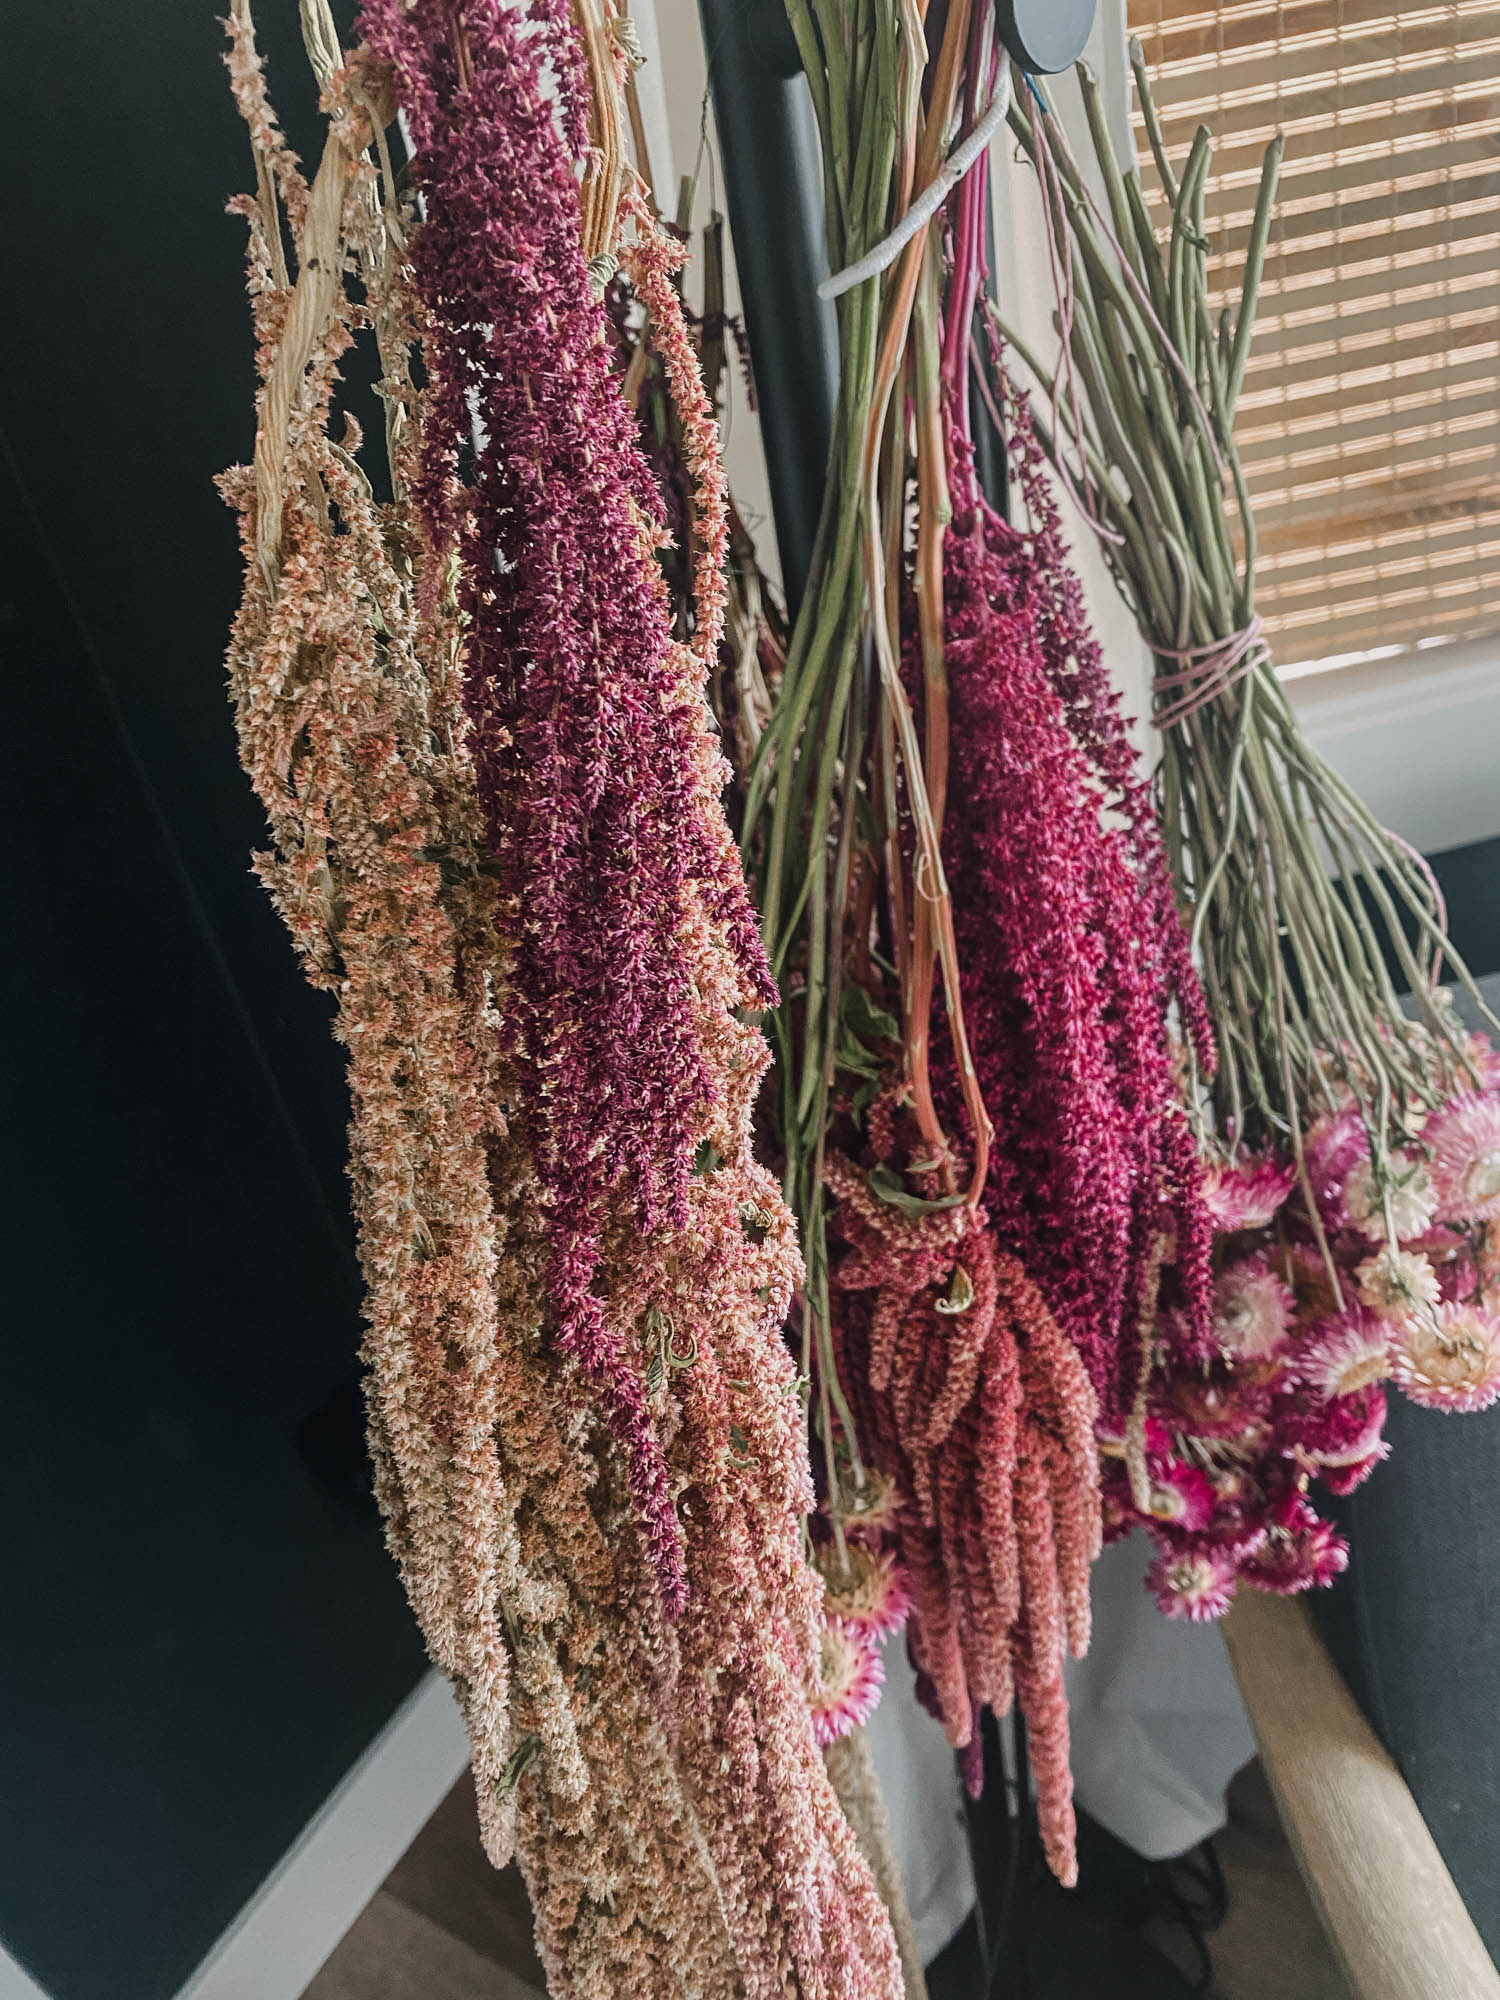 How to dry flowers for home decor